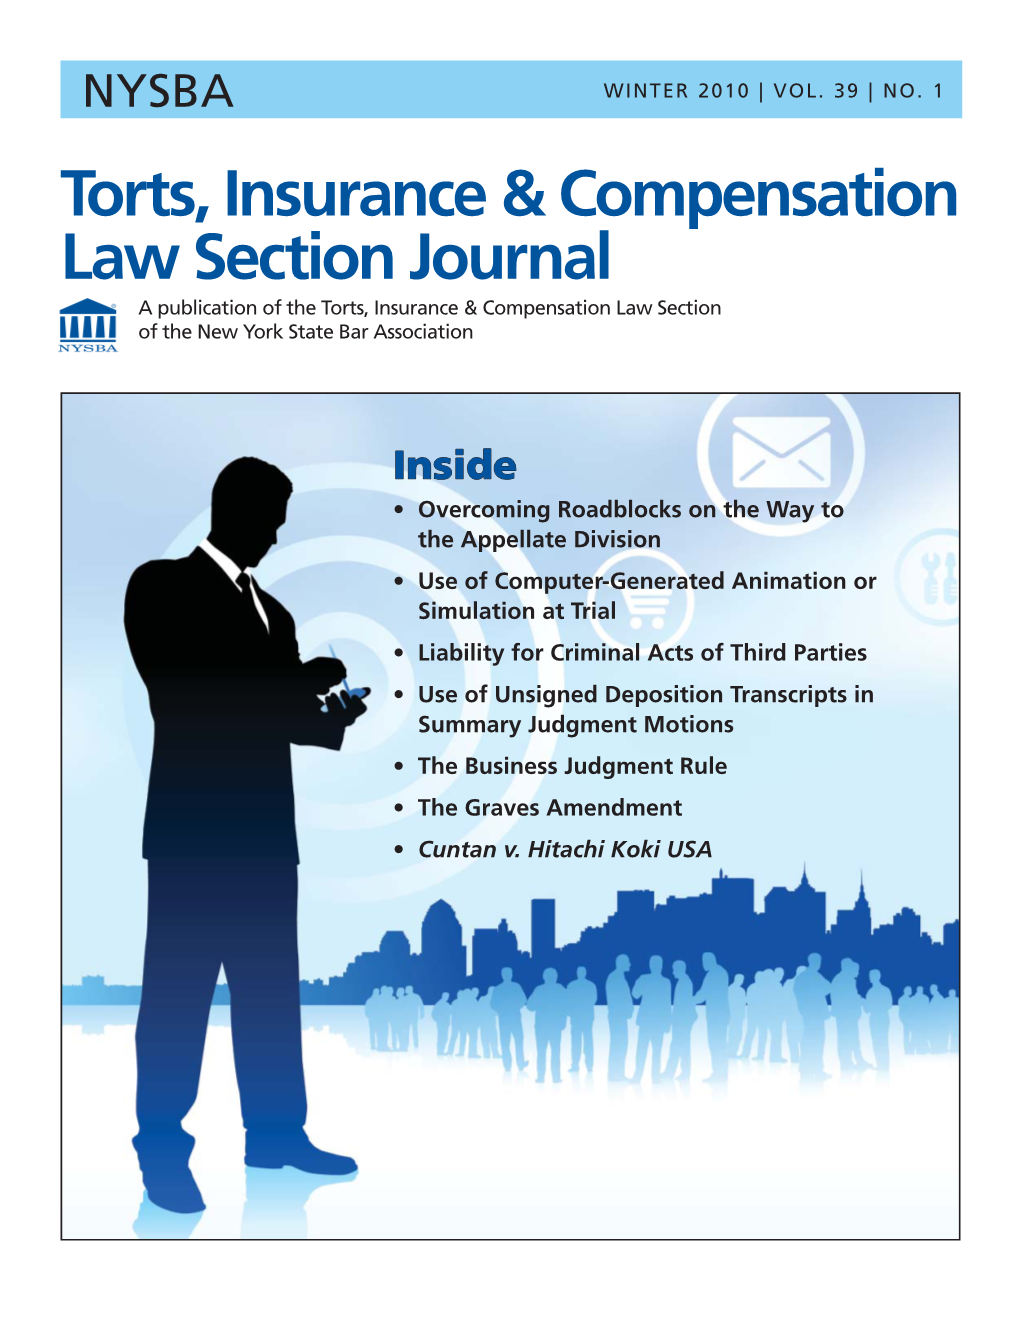 Torts, Insurance & Compensation Law Section Journal